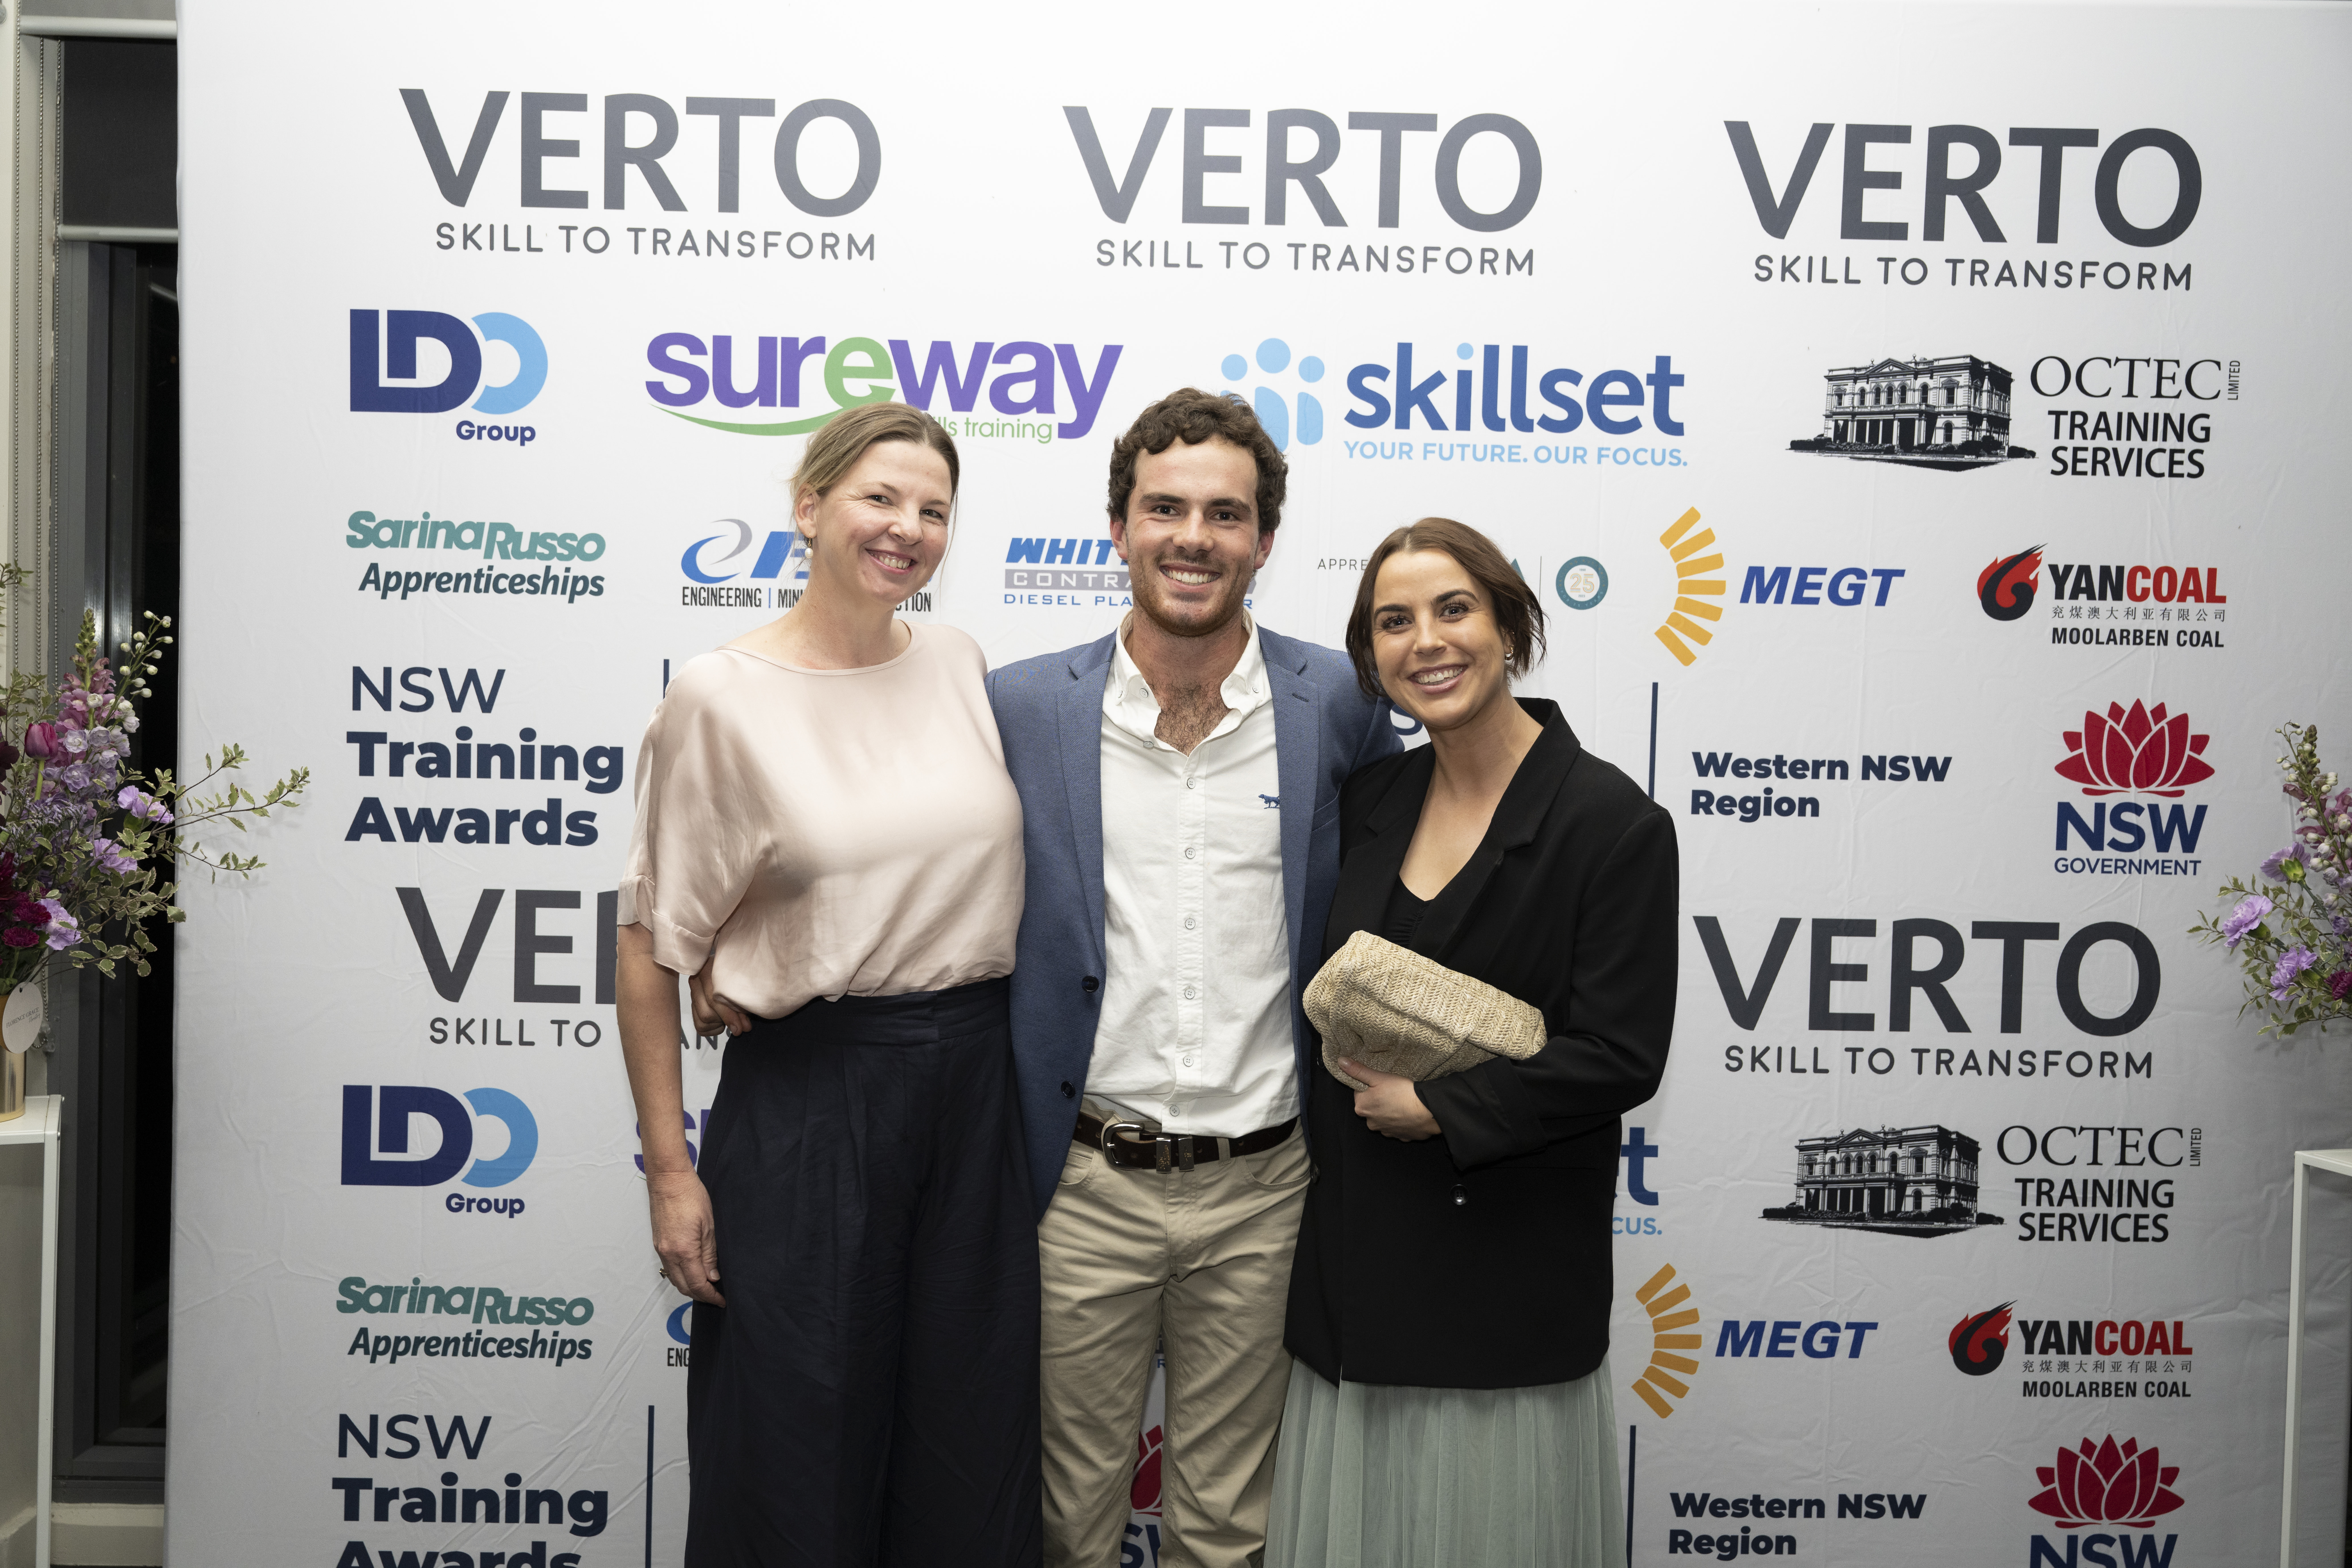 2023 Western NSW Region Vocational Student of the Year Award